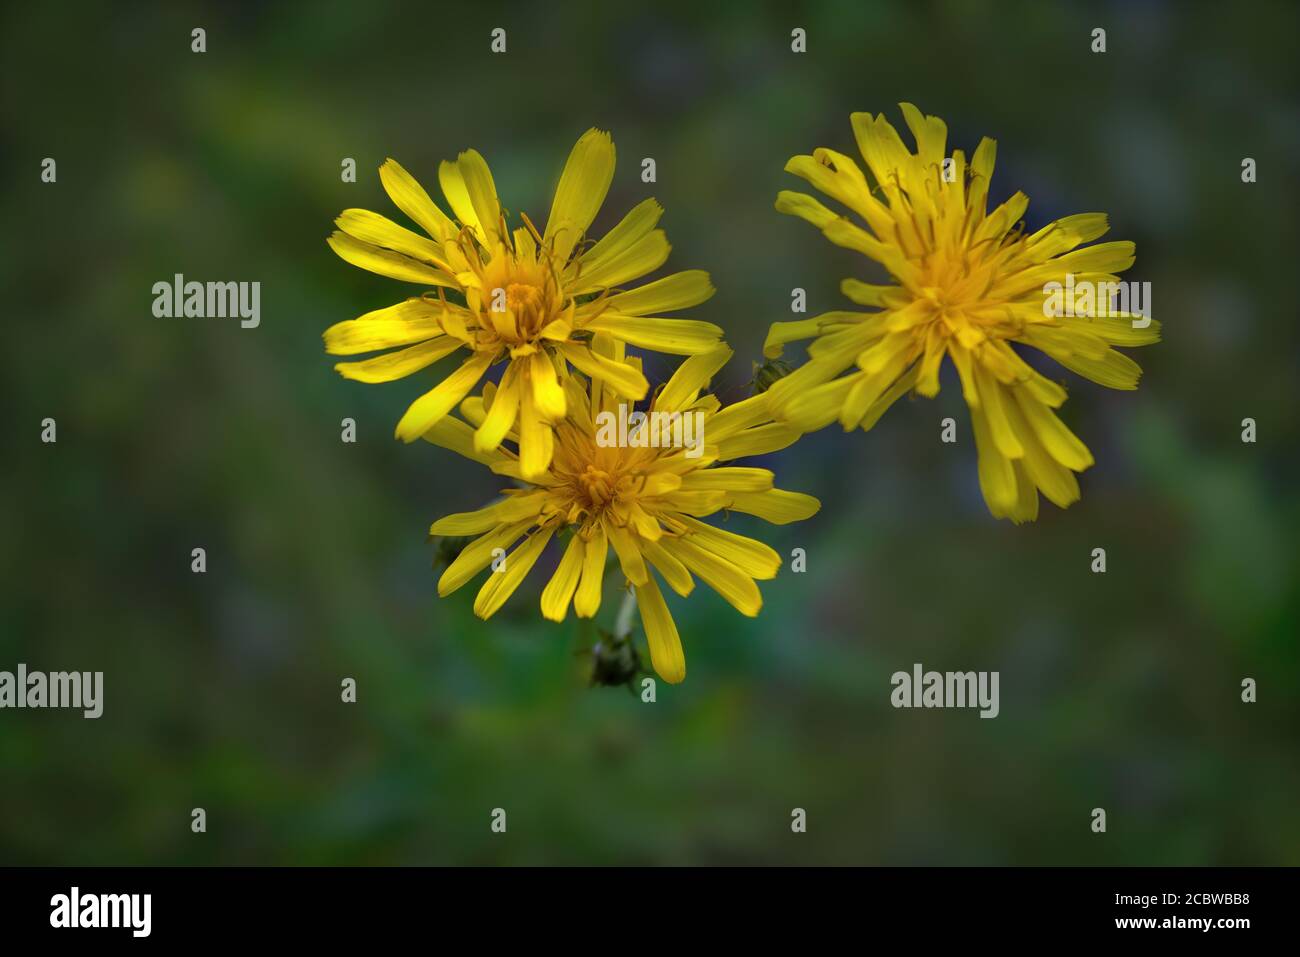 Yellow wildflowers on a blurred natural background close-up. Stock Photo